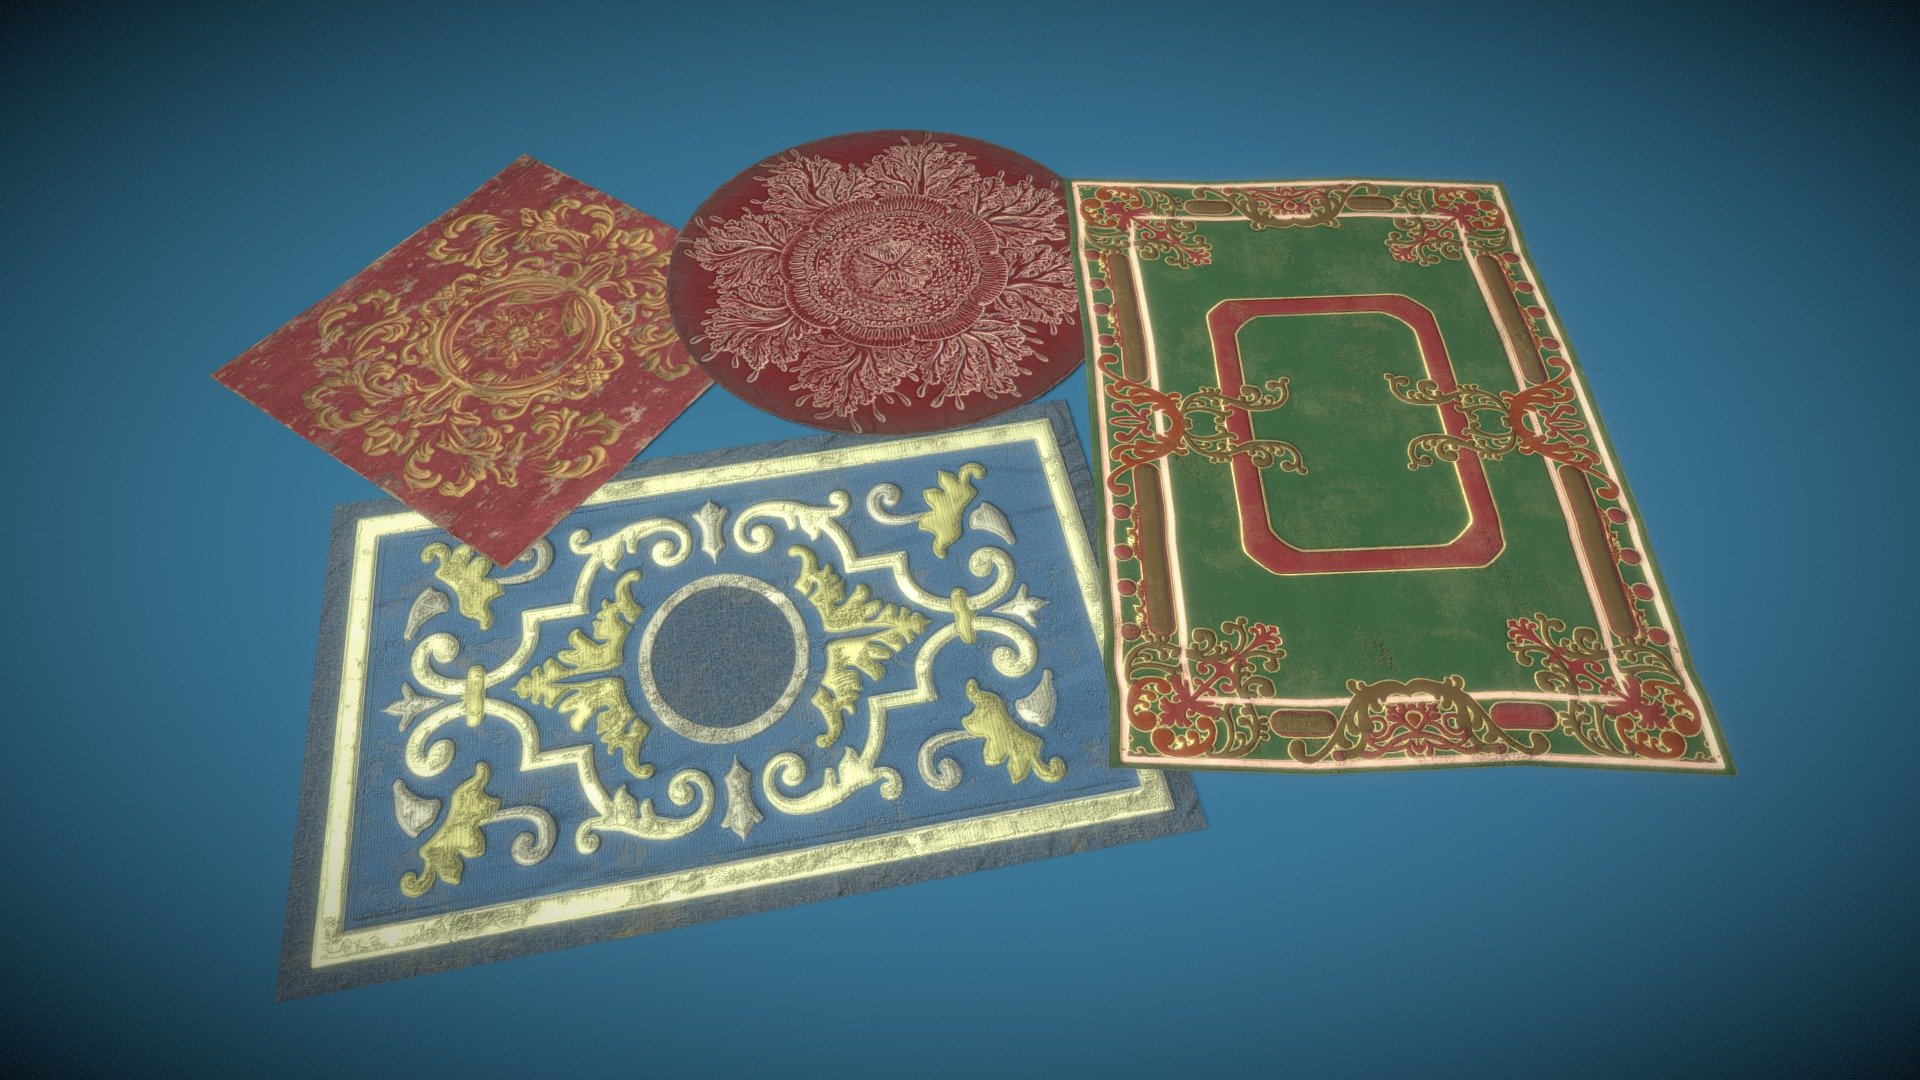 Custom-Order from ATLAS Server AquariusRP



A carpet gives every room a more homely appearance - be it a pirate ship, a simple house or a mansion.



4K Textures (4096x4096px) - Rug1, Rug2, Rug3, Rug4



LowPoly-Asset for Video &amp;/or Games



Made with: 3Ds Max, zBrush, Substance Painter, Photoshop - [Set] 4 Victorian Carpets - Buy Royalty Free 3D model by MDSDesign 3d model